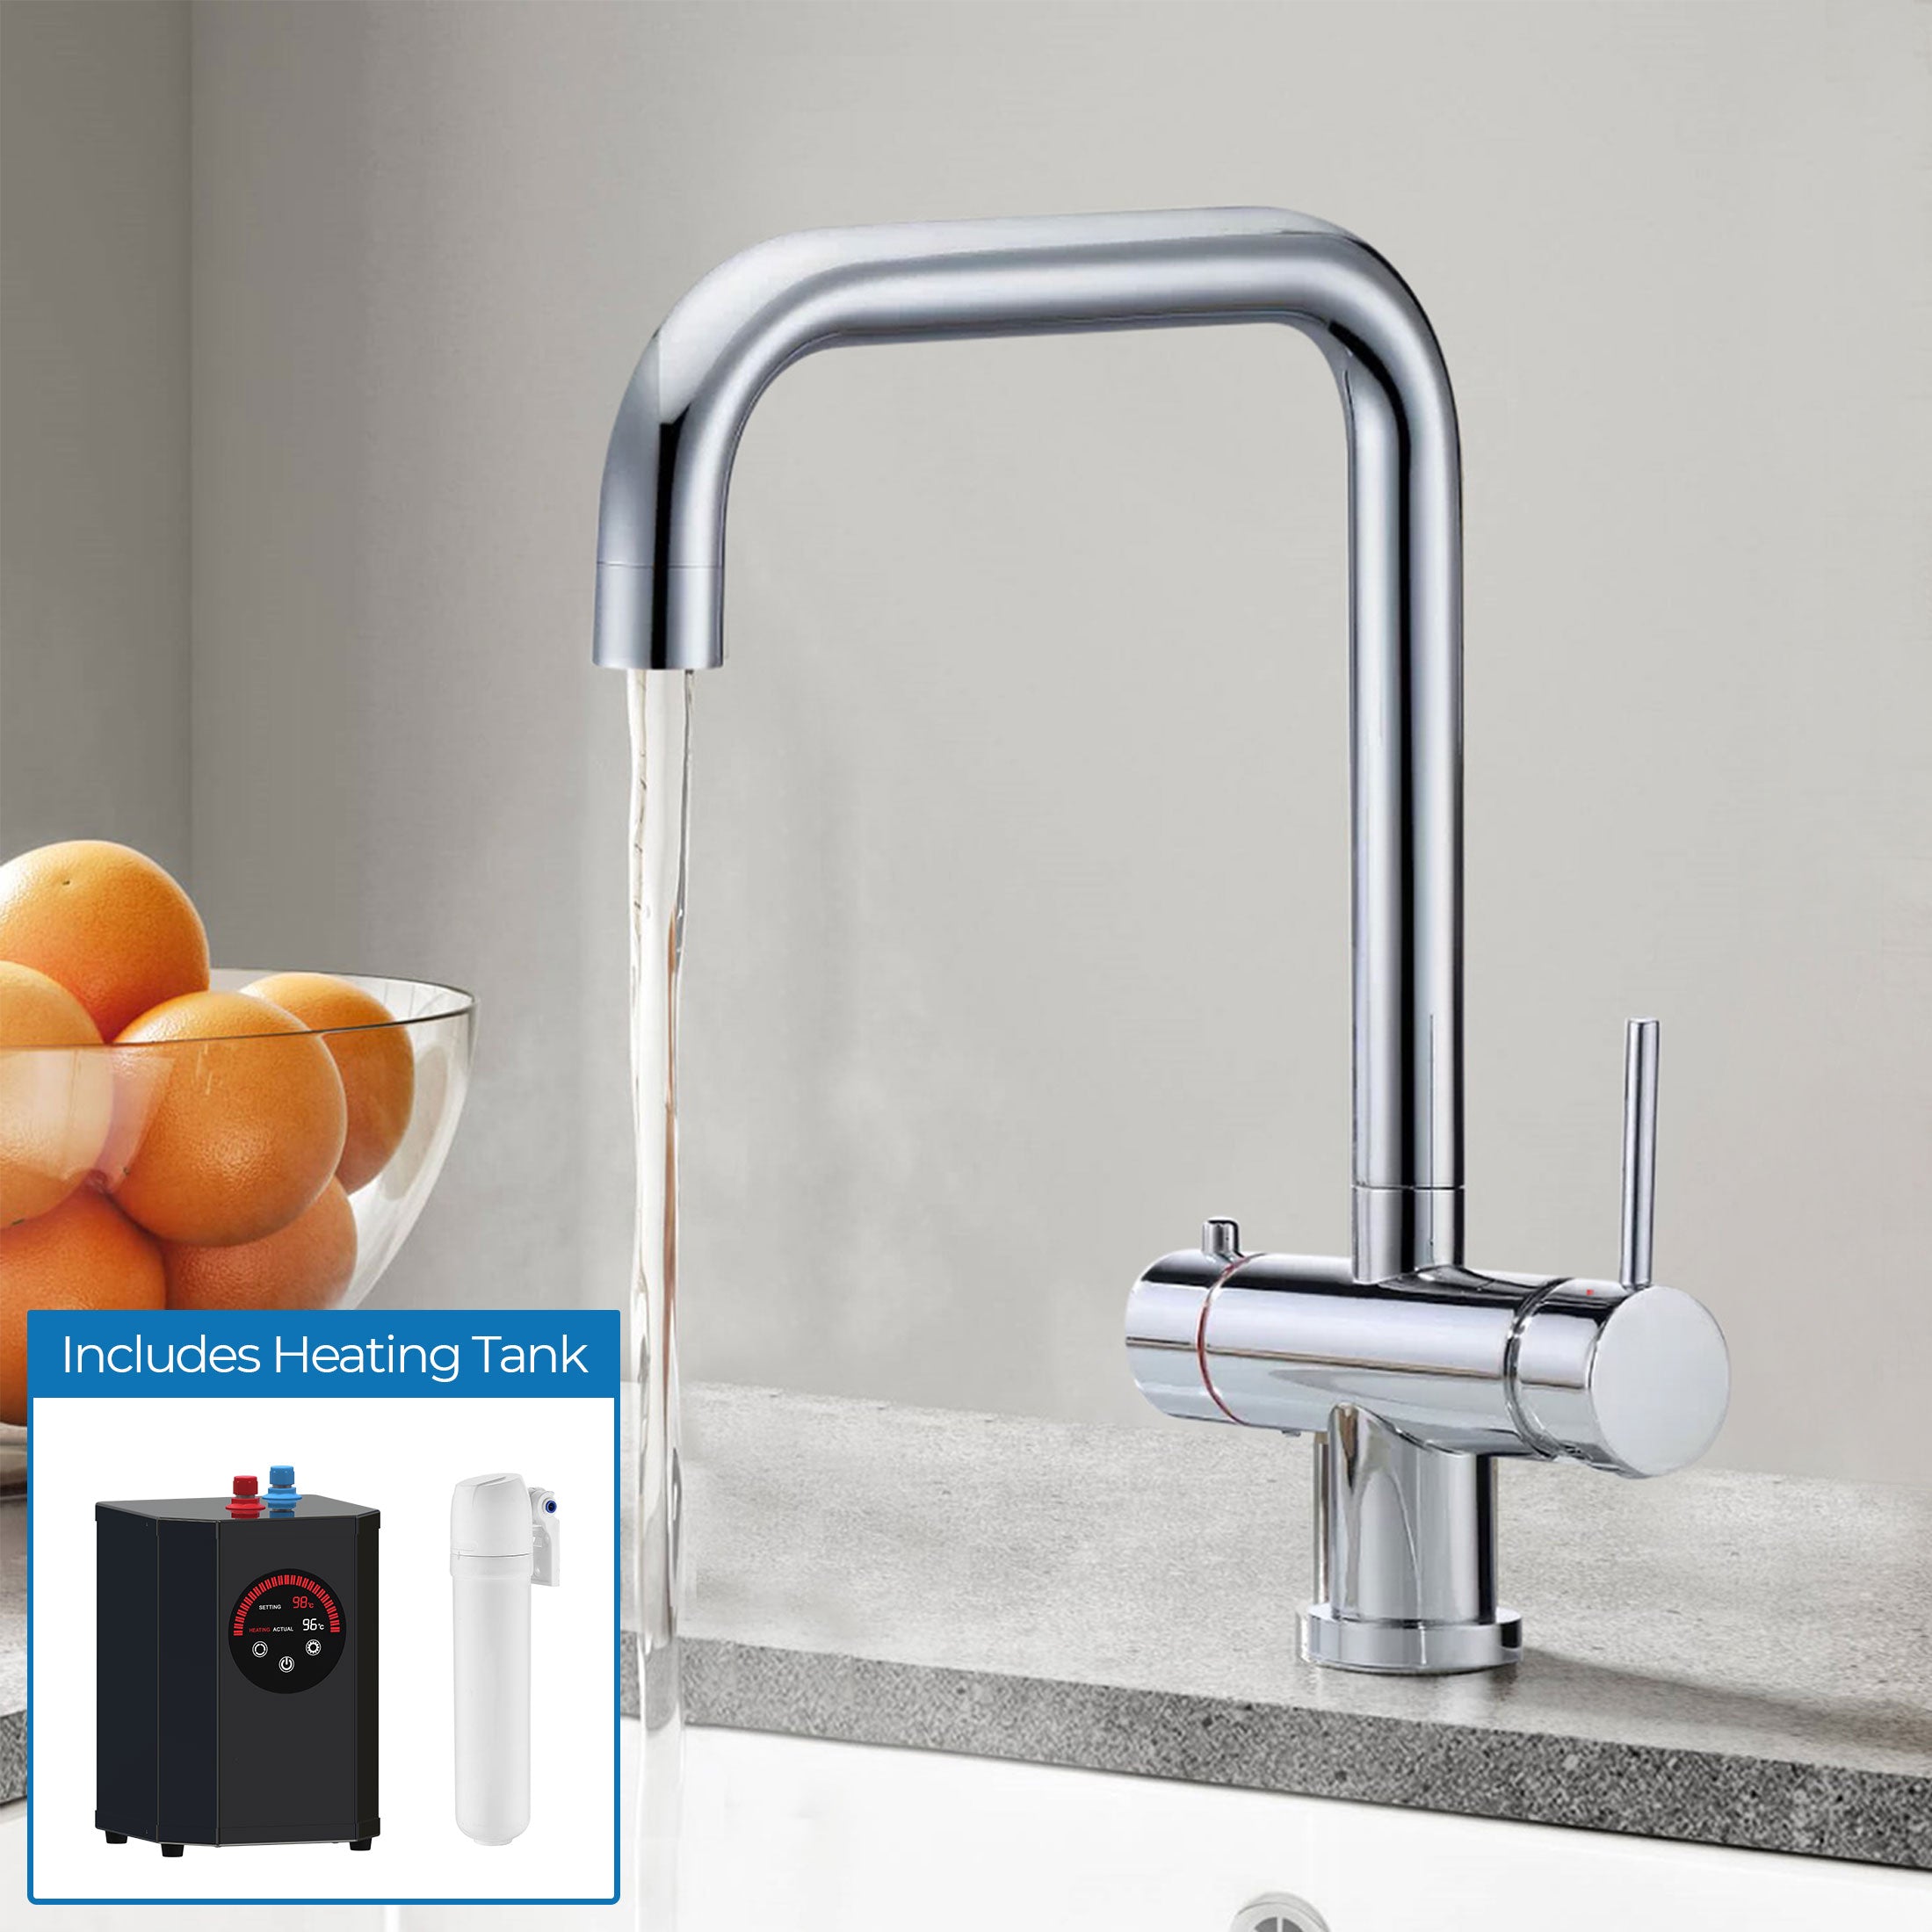 Alexander Instant Boiling Water Kitchen Tap Chrome with heating tank